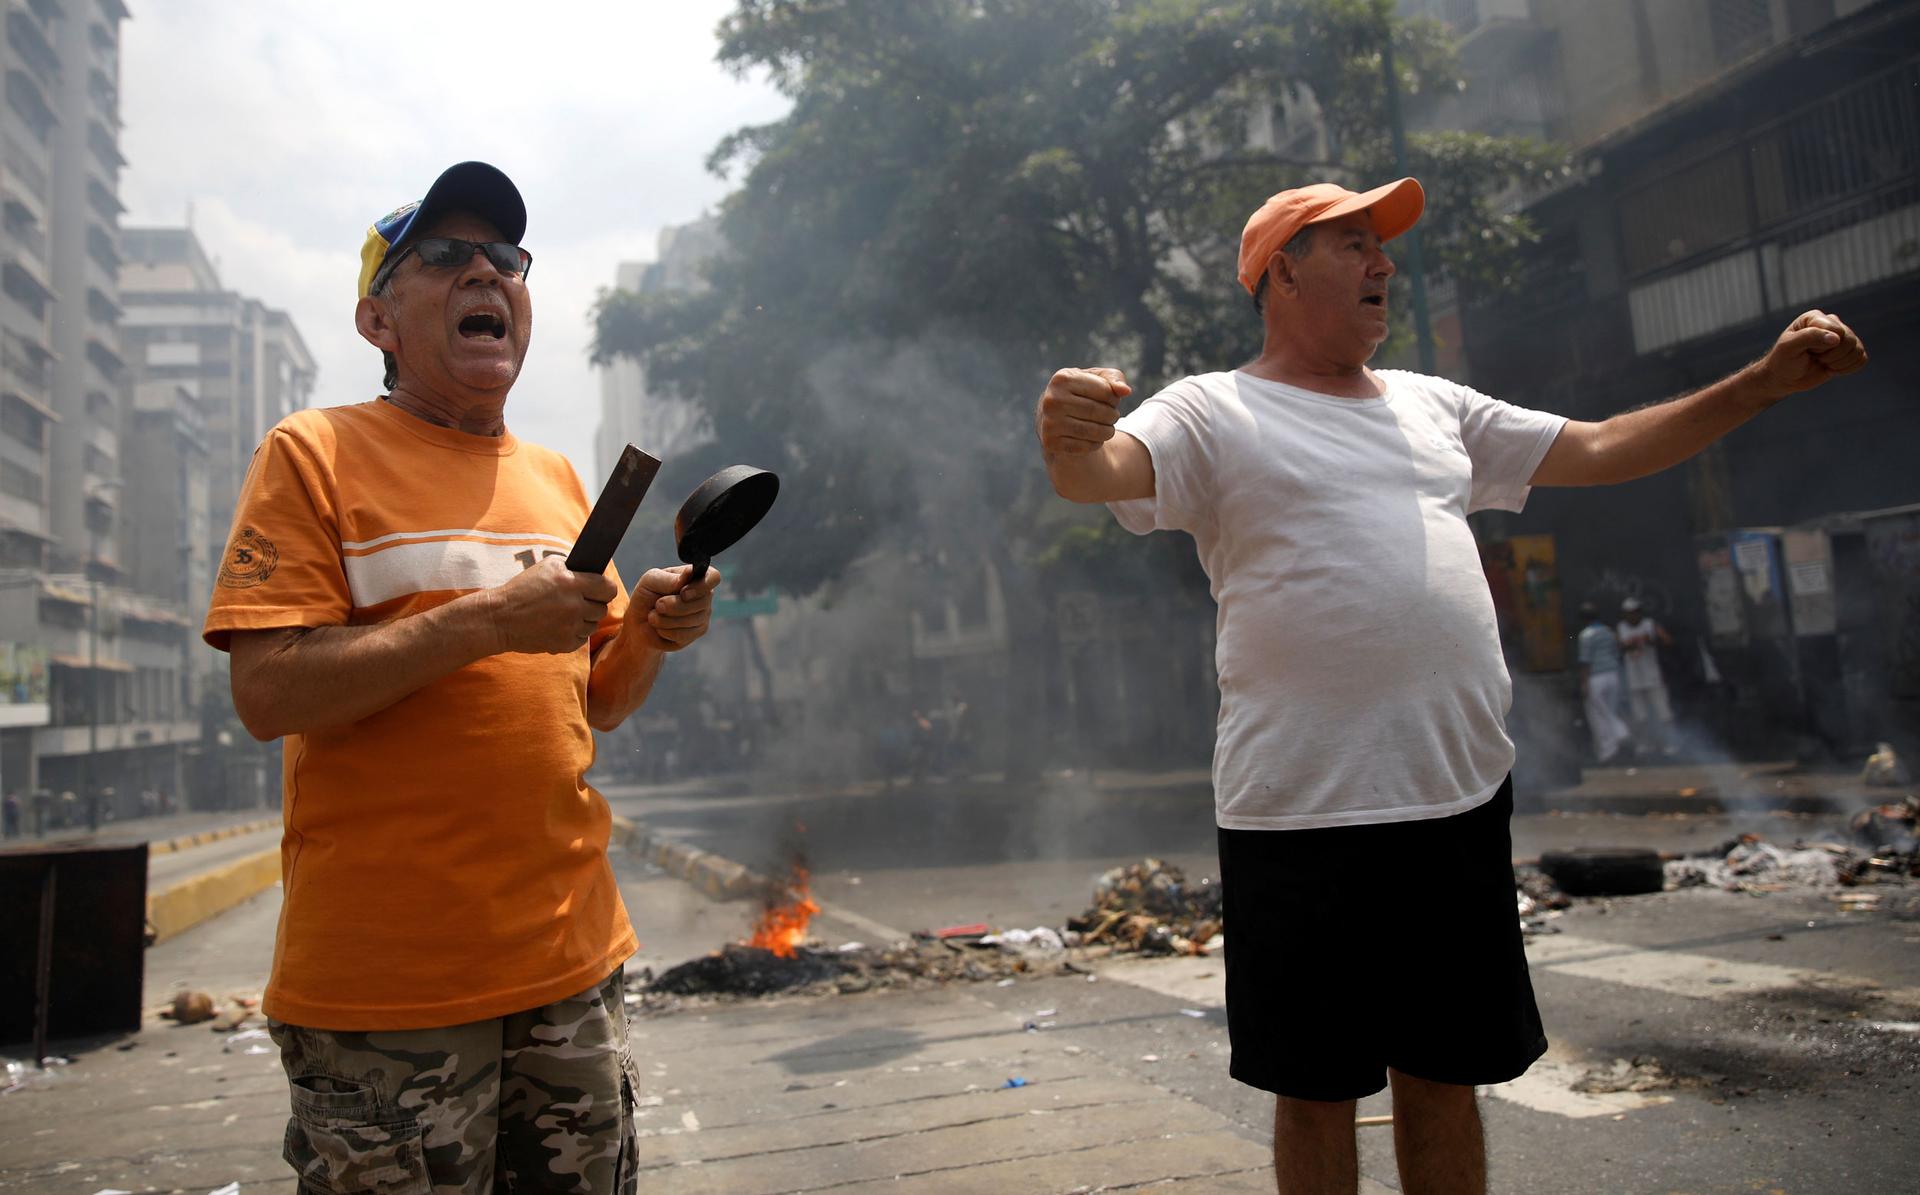 A demonstrators wearing an orange shirt stand with a small pan in his hand next to another protester in a white t-shirt and orange hat.